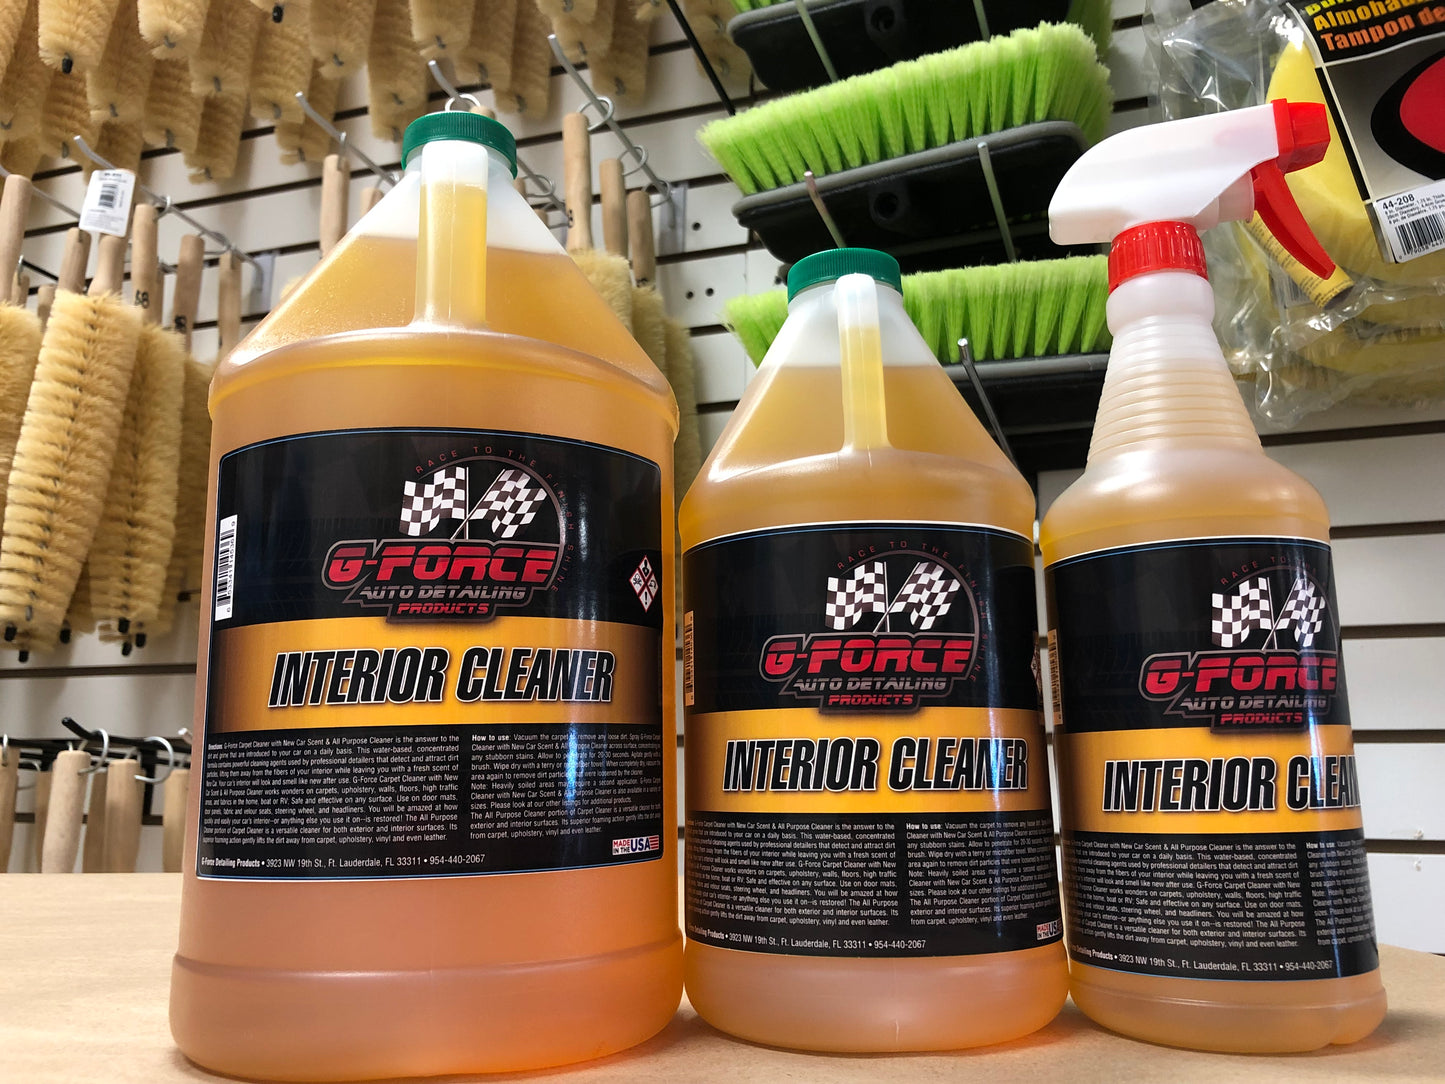 GLASS CLEANER – G Force Auto Detailing Products